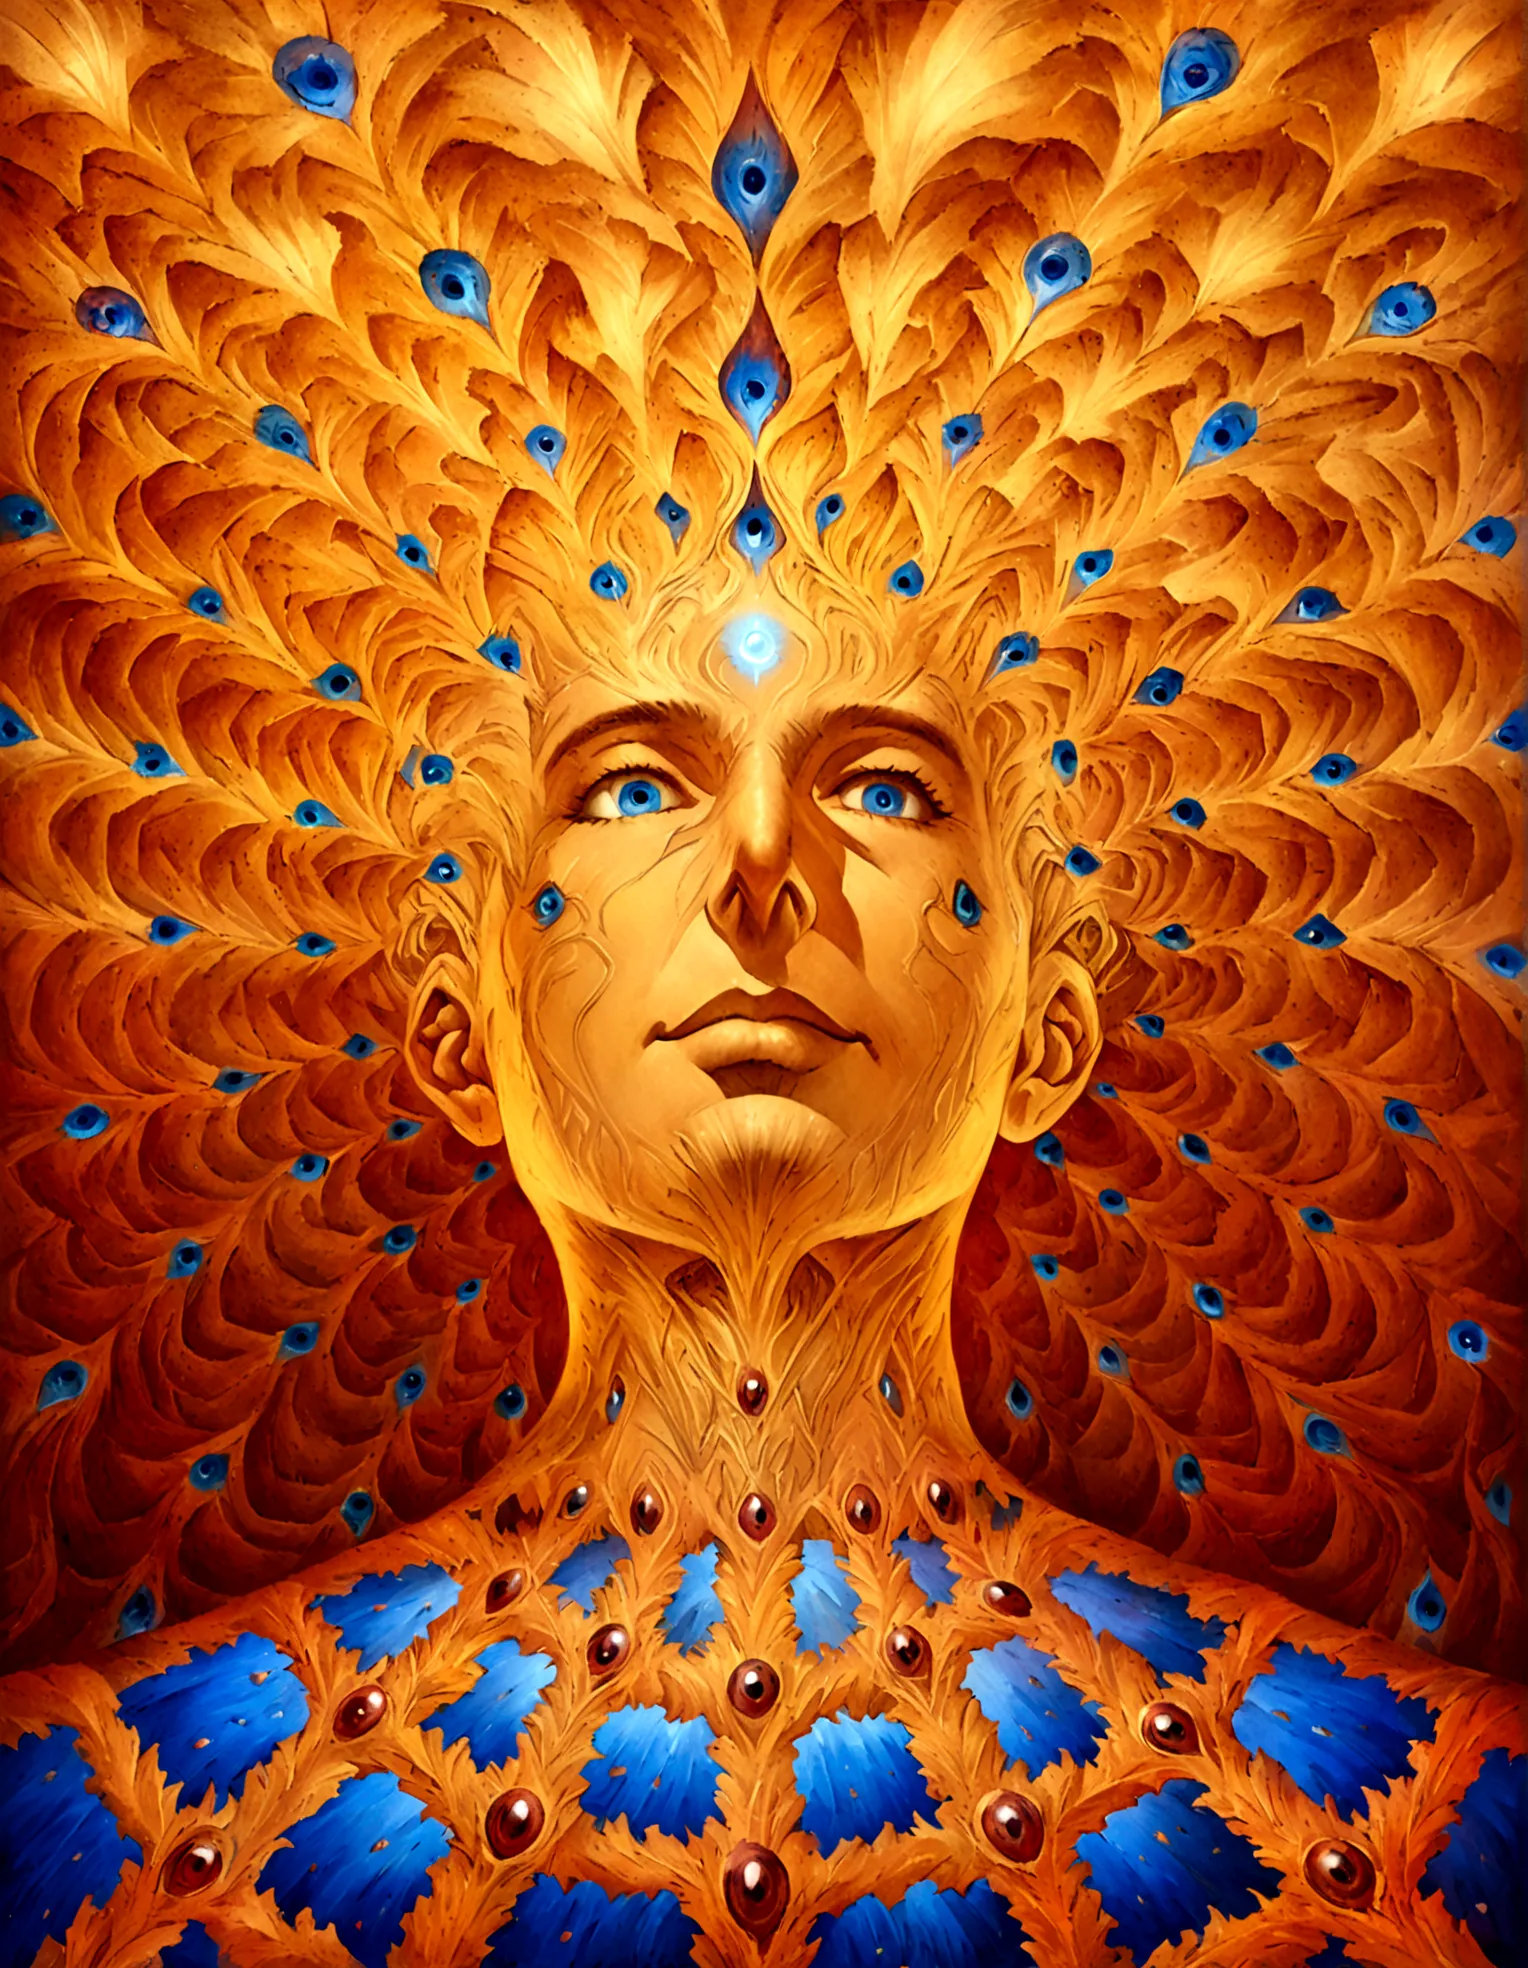 a painting of a man with many eyes and a face surrounded by flames, alex grey art, alex grey and beksinski, alex gray, style of ...